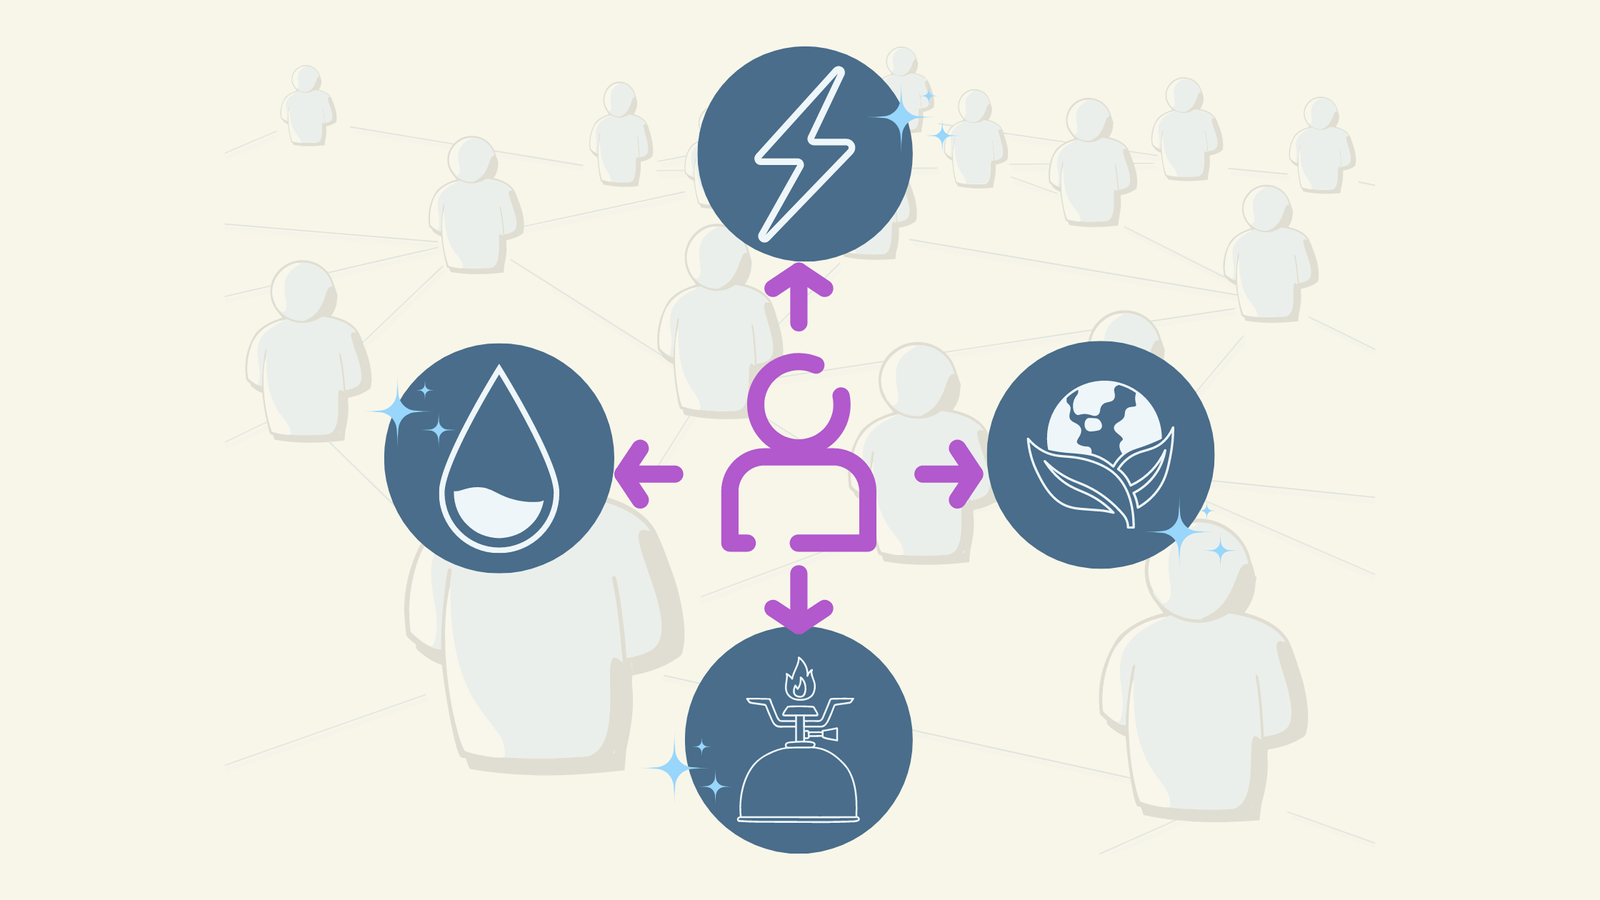 Graphic of an icon of a person with arrows pointing towards 4 icons of public utilties.